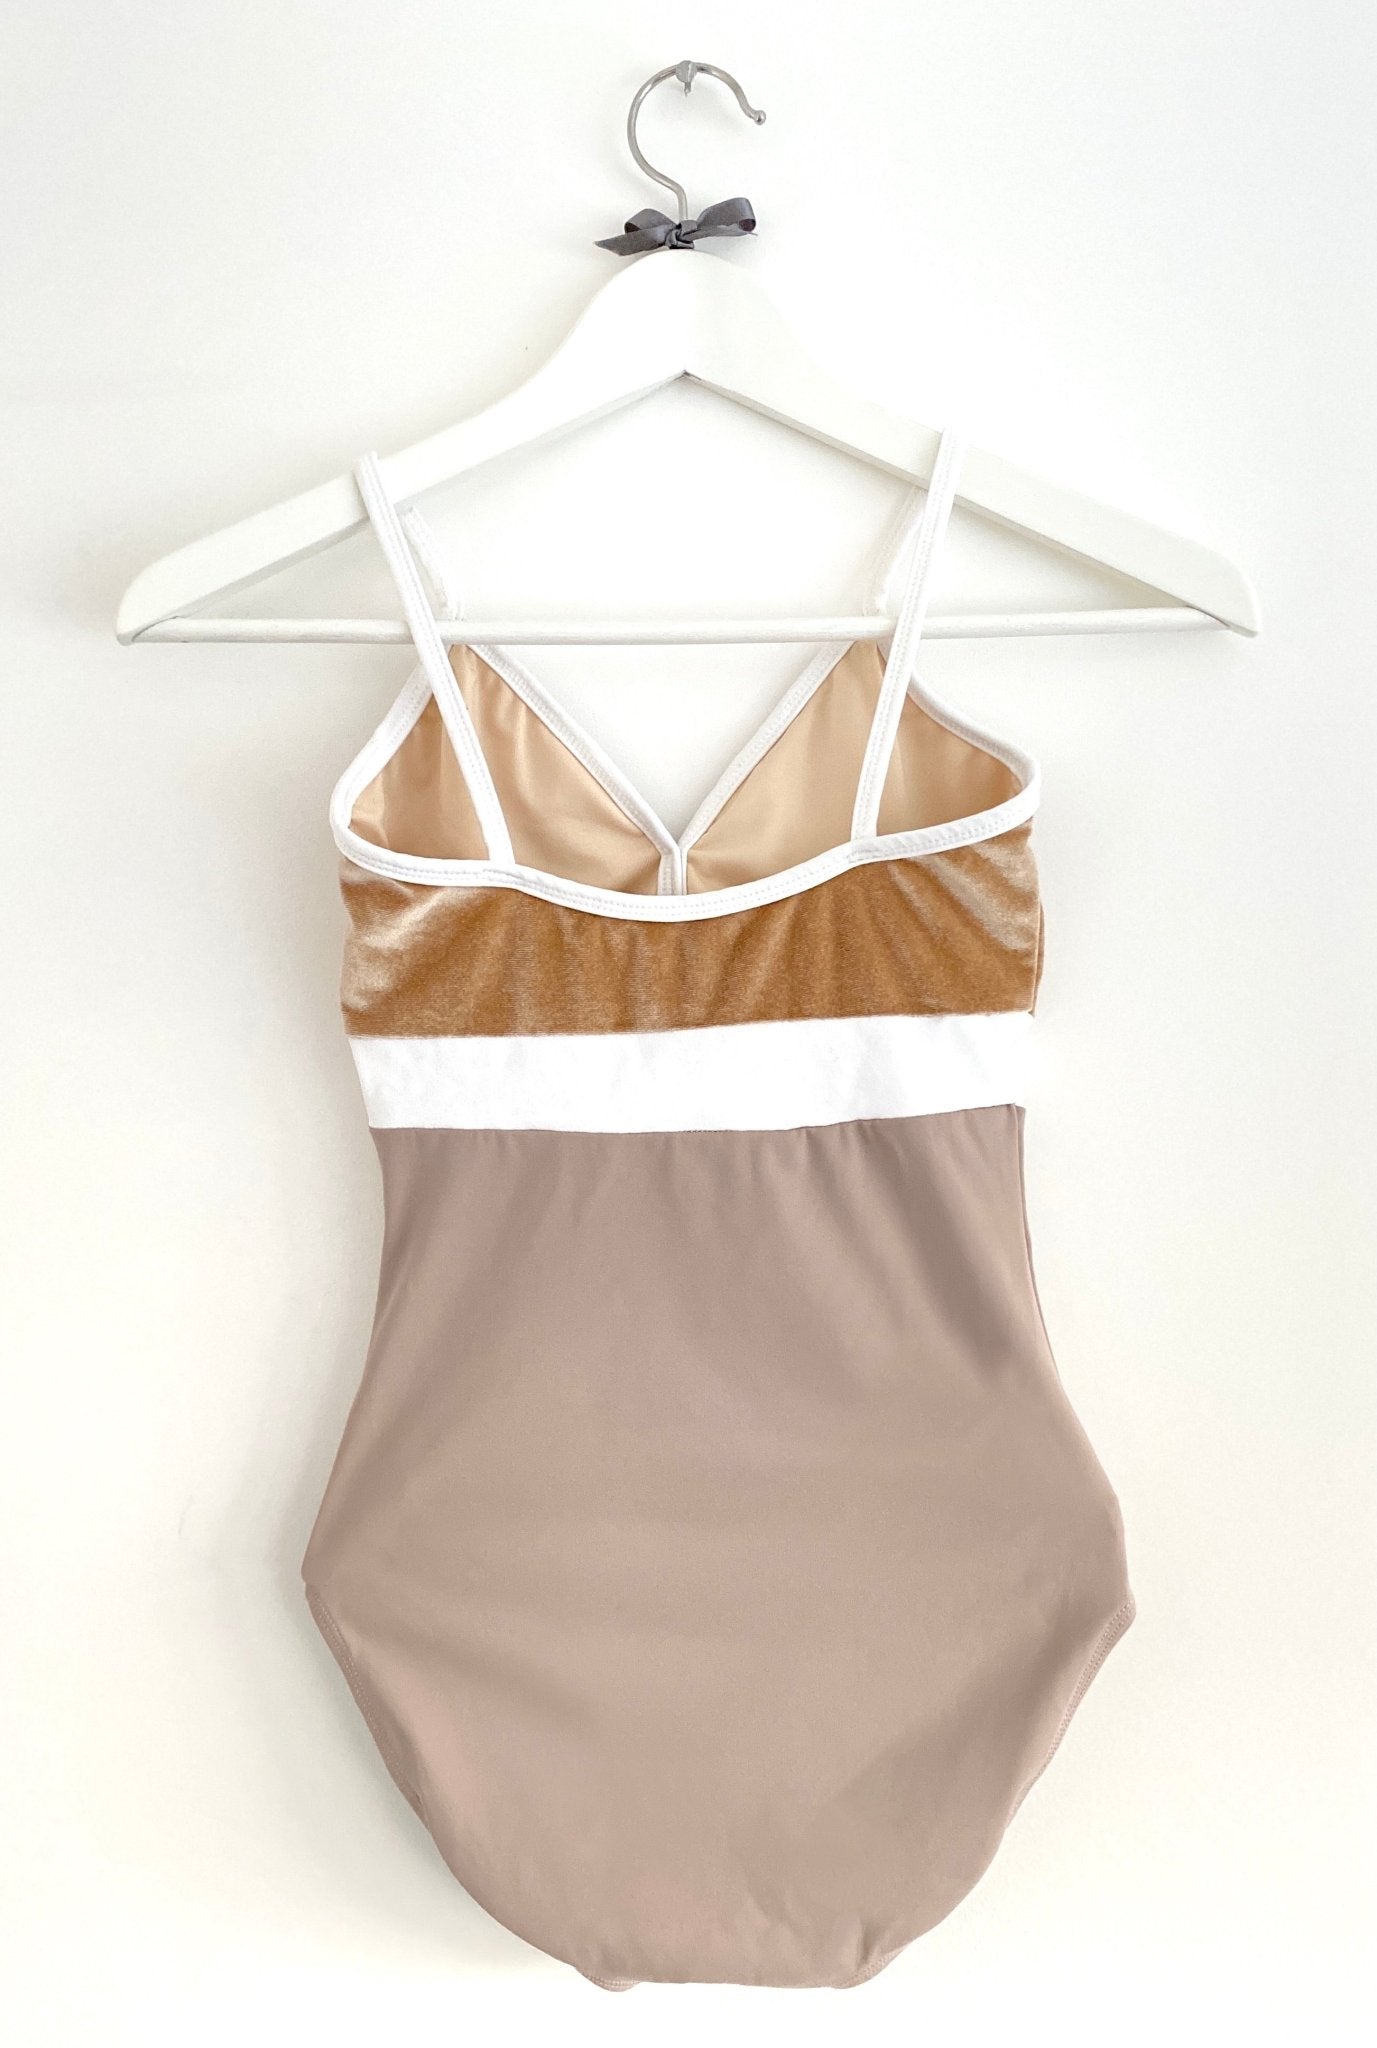 Gold and Stone Cami Leo with Velour Bust -Gold and Stone Cami Leo with Velour Bust#mLeotardTHE COLLECTIVE DANCEWEAR